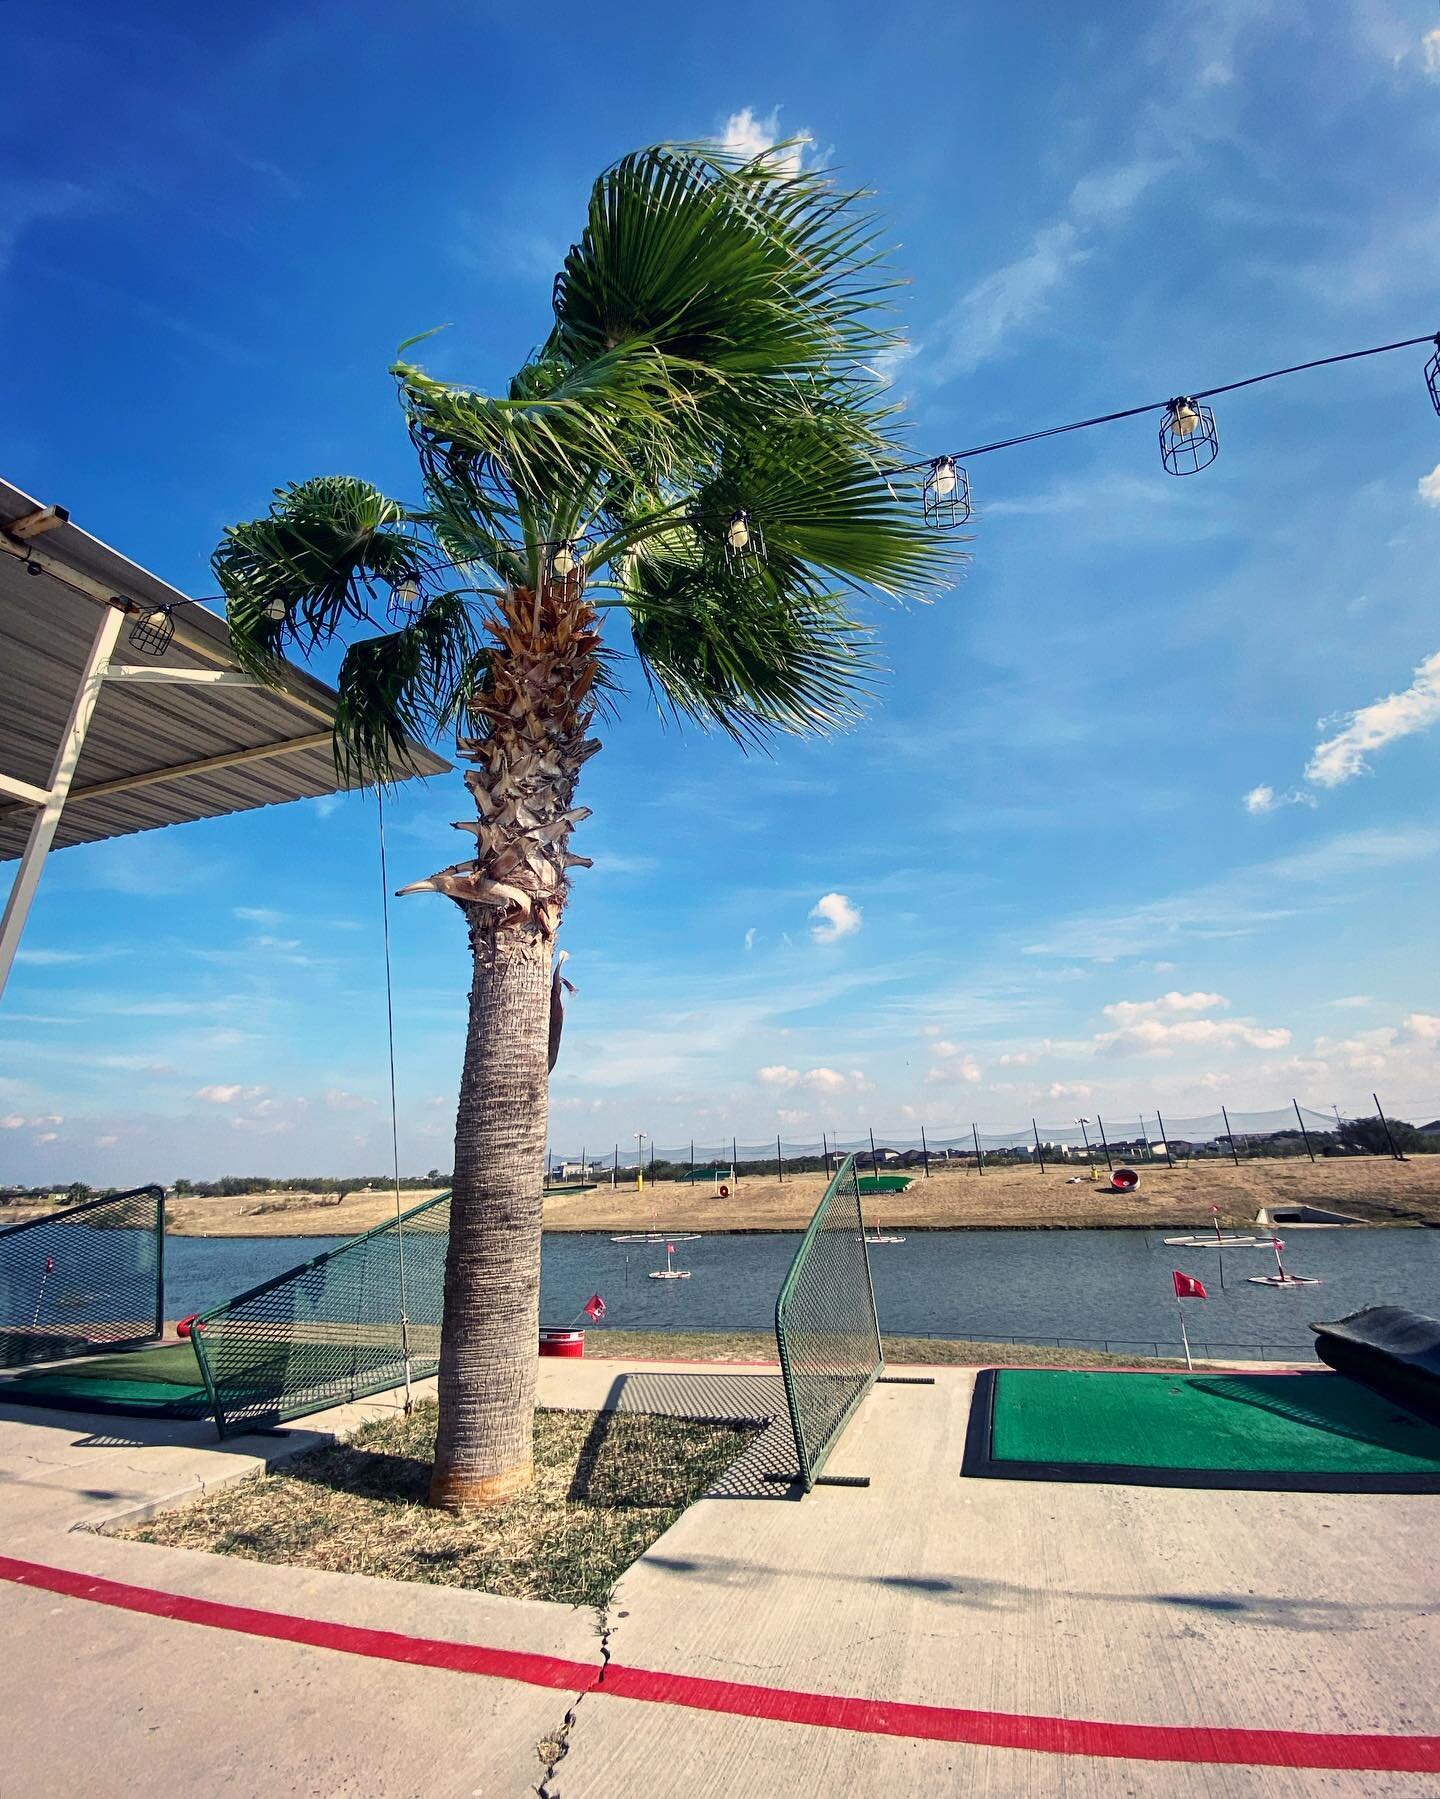 Due to the high winds Laredo has had today, @alexanderminigolf will be closed. But worry not! Come catch us next weekend! ⛳️ Open Friday-Sunday! 3:00PM-9:00PM! Last sale is at 8:45. Have a good Sunday folks! 🌥

#956 #laredo #southtexas #thingstodoin